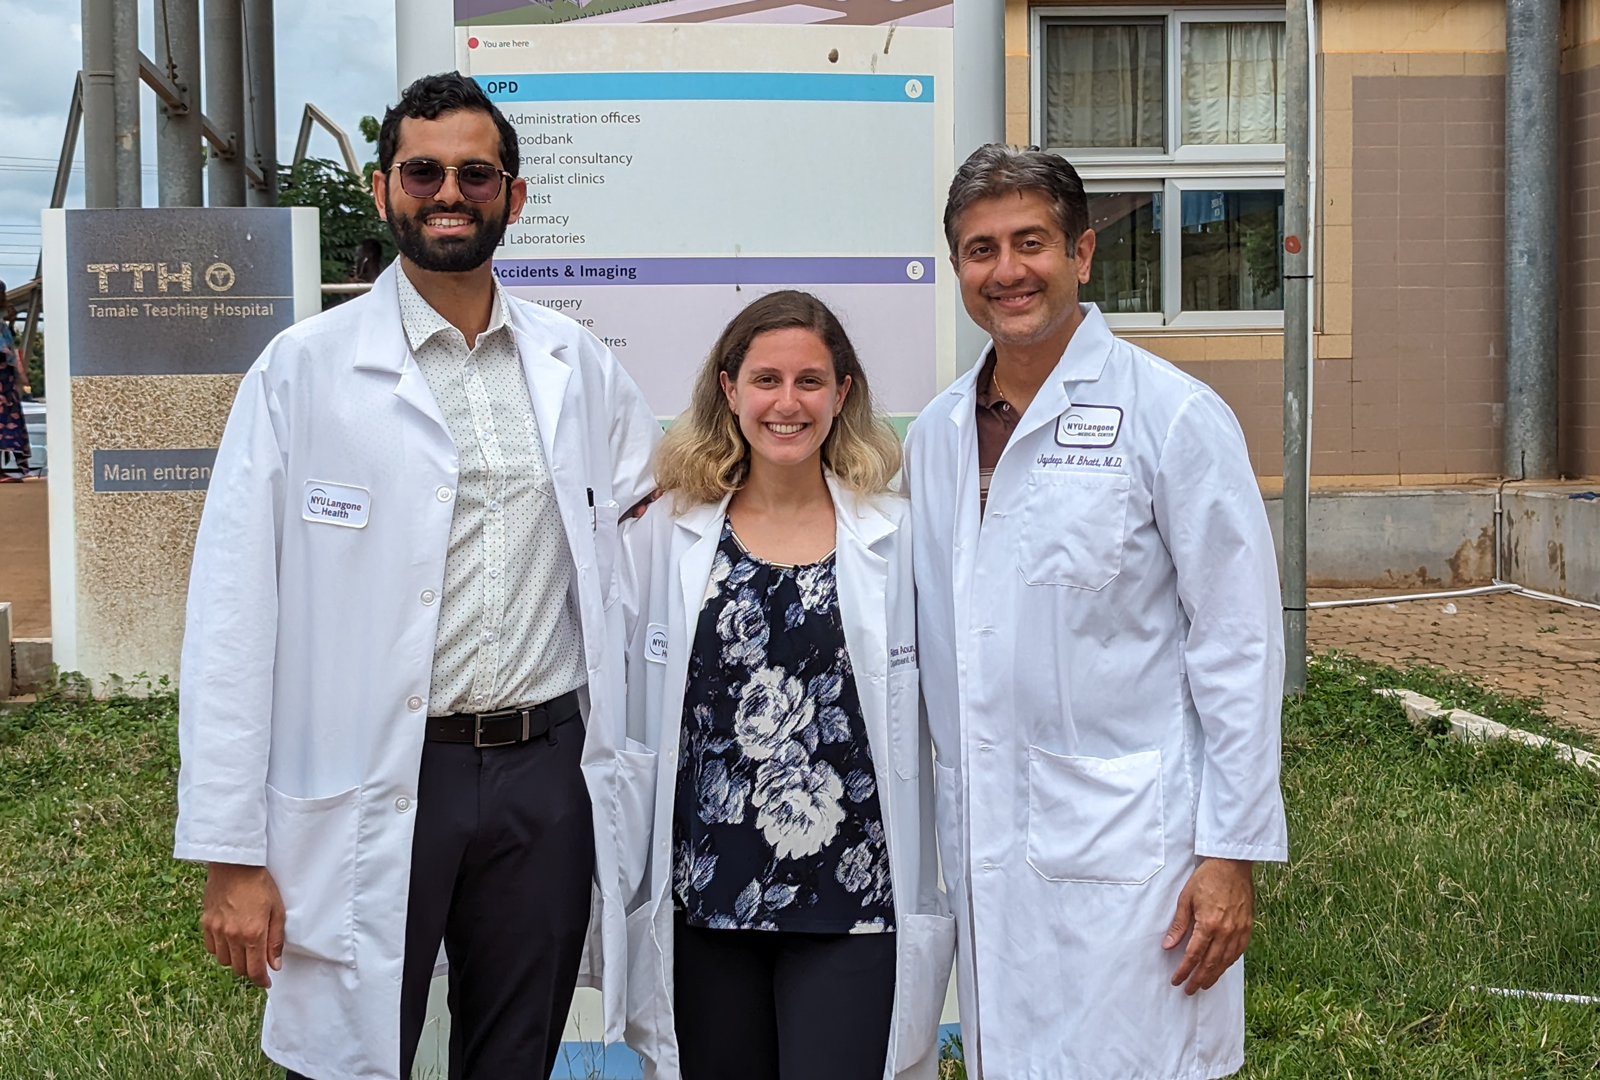 Three people wearing white coats and smiling outside of the hospital